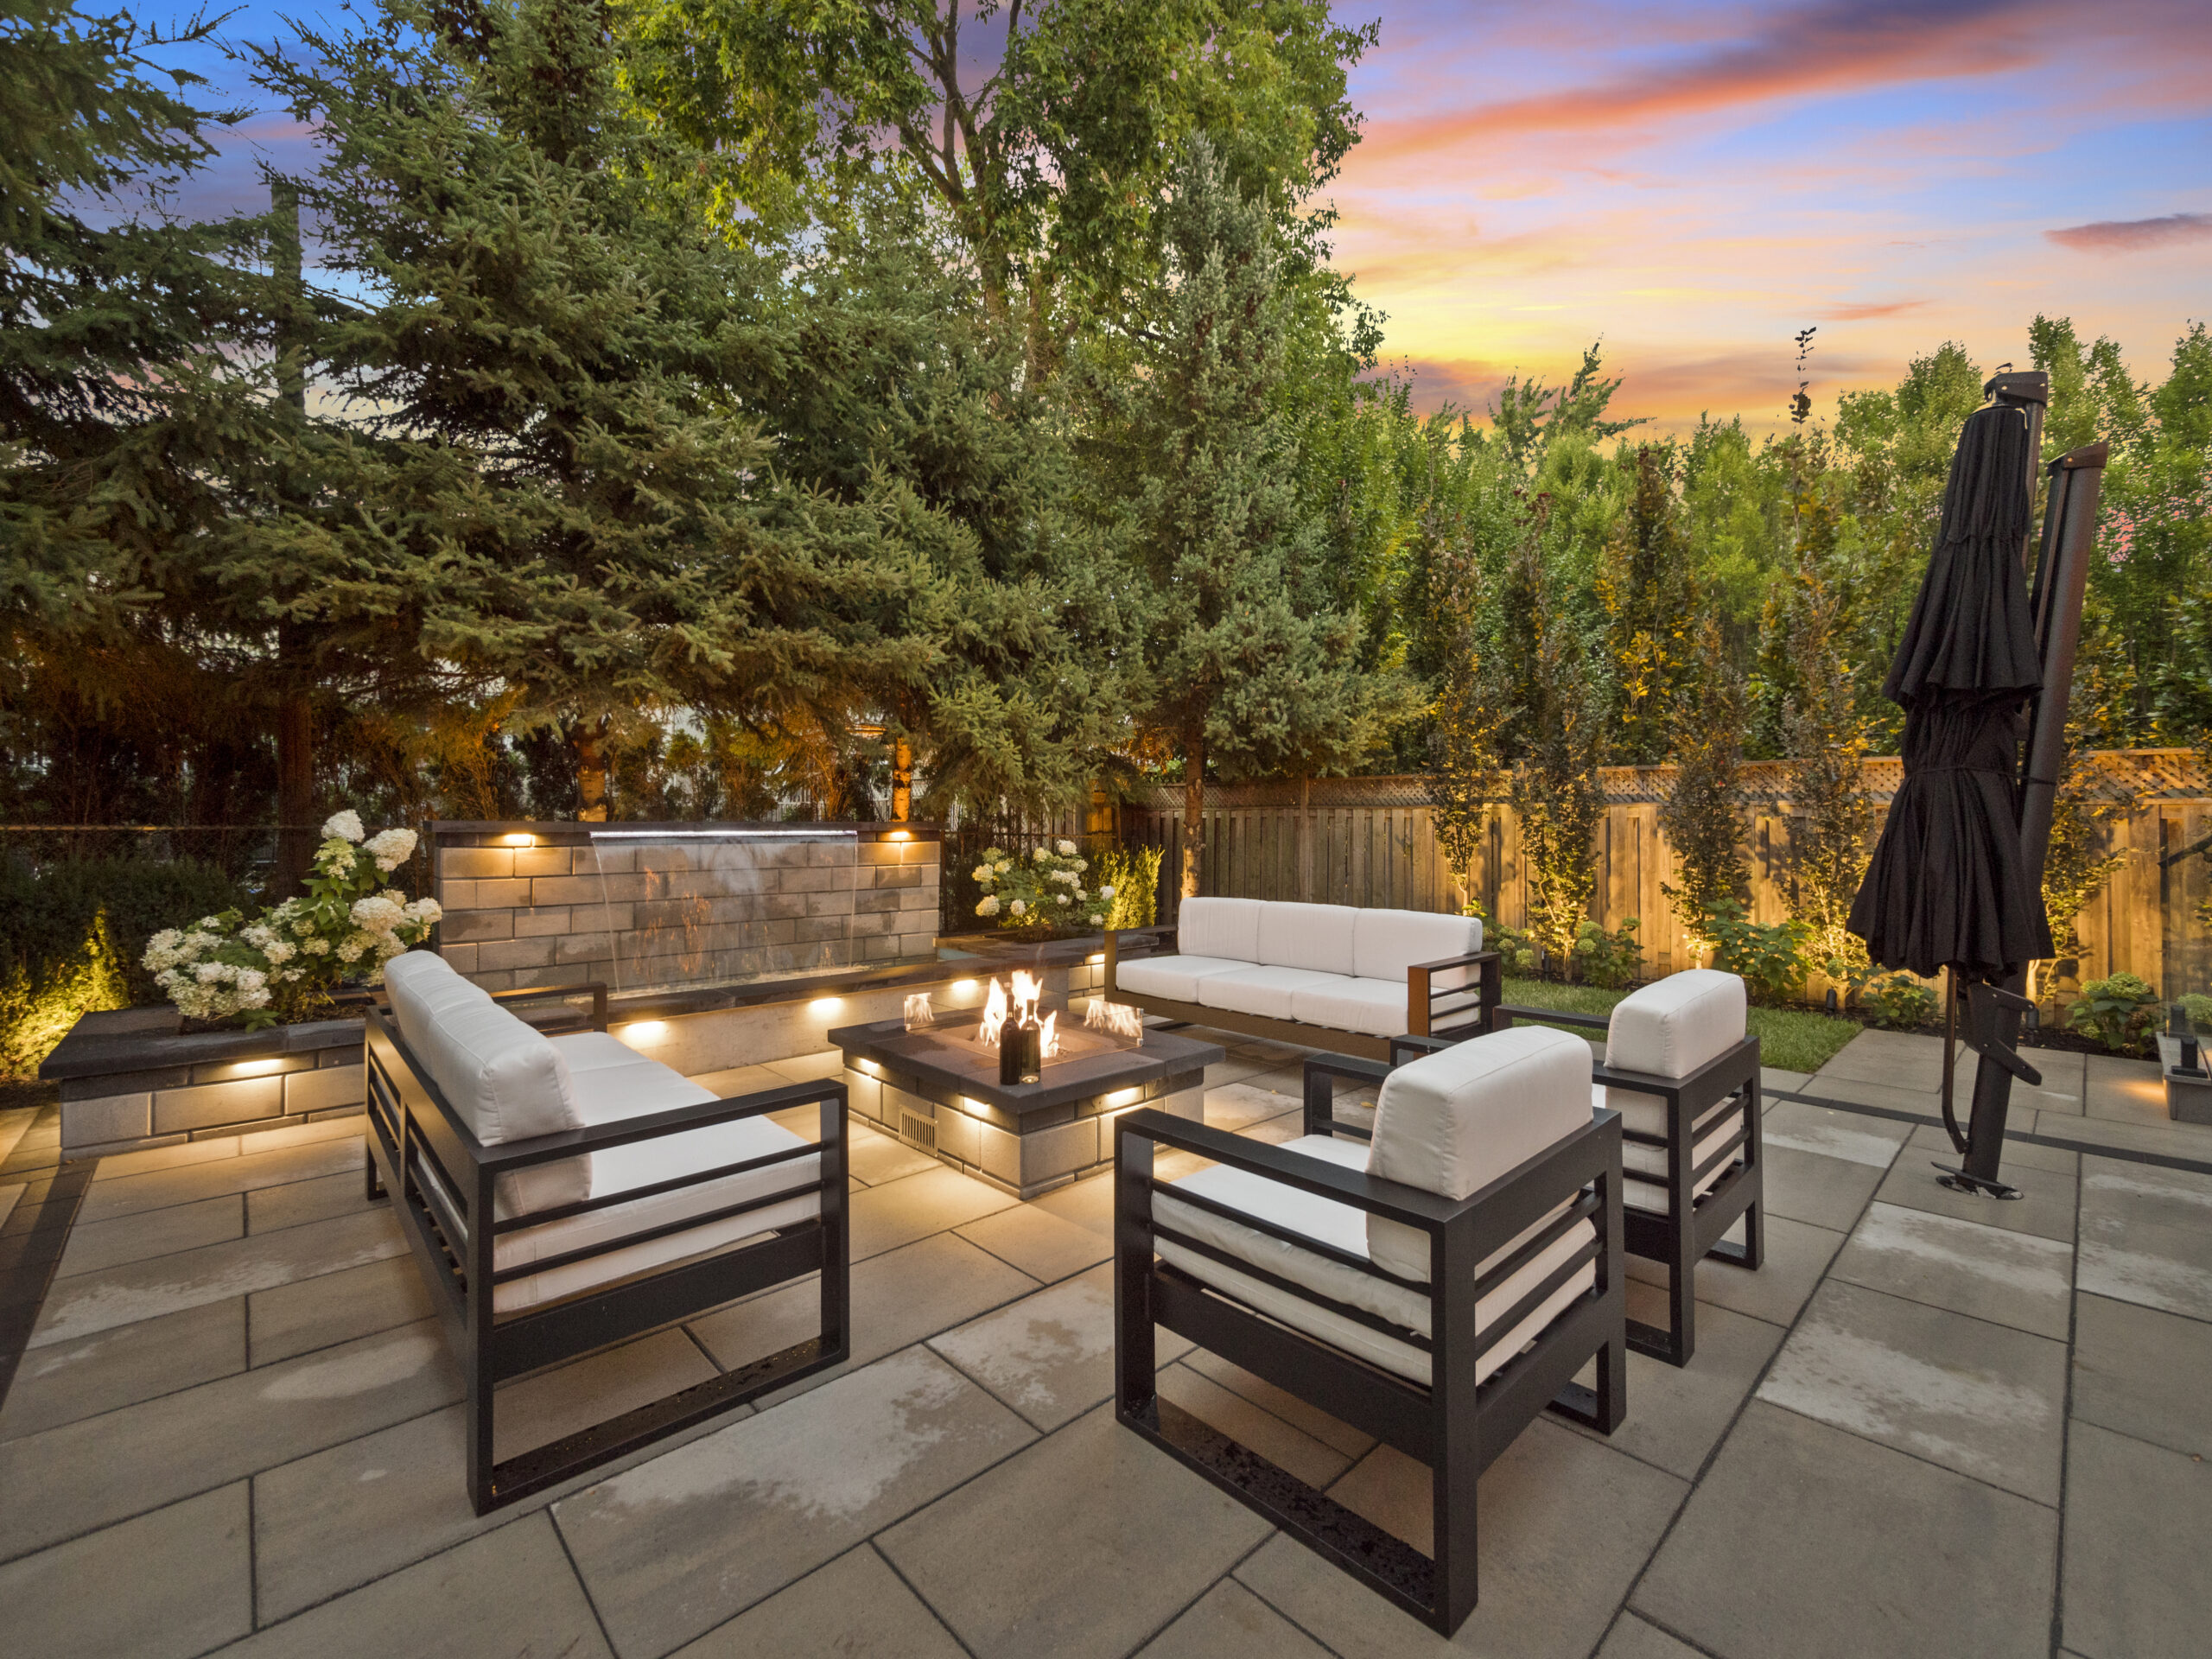 Best Patio Installations Kirkland | Paver Patio Installations Kirkland | Home Service Specialists | Stunning Outdoor Paver Patio with Firepit